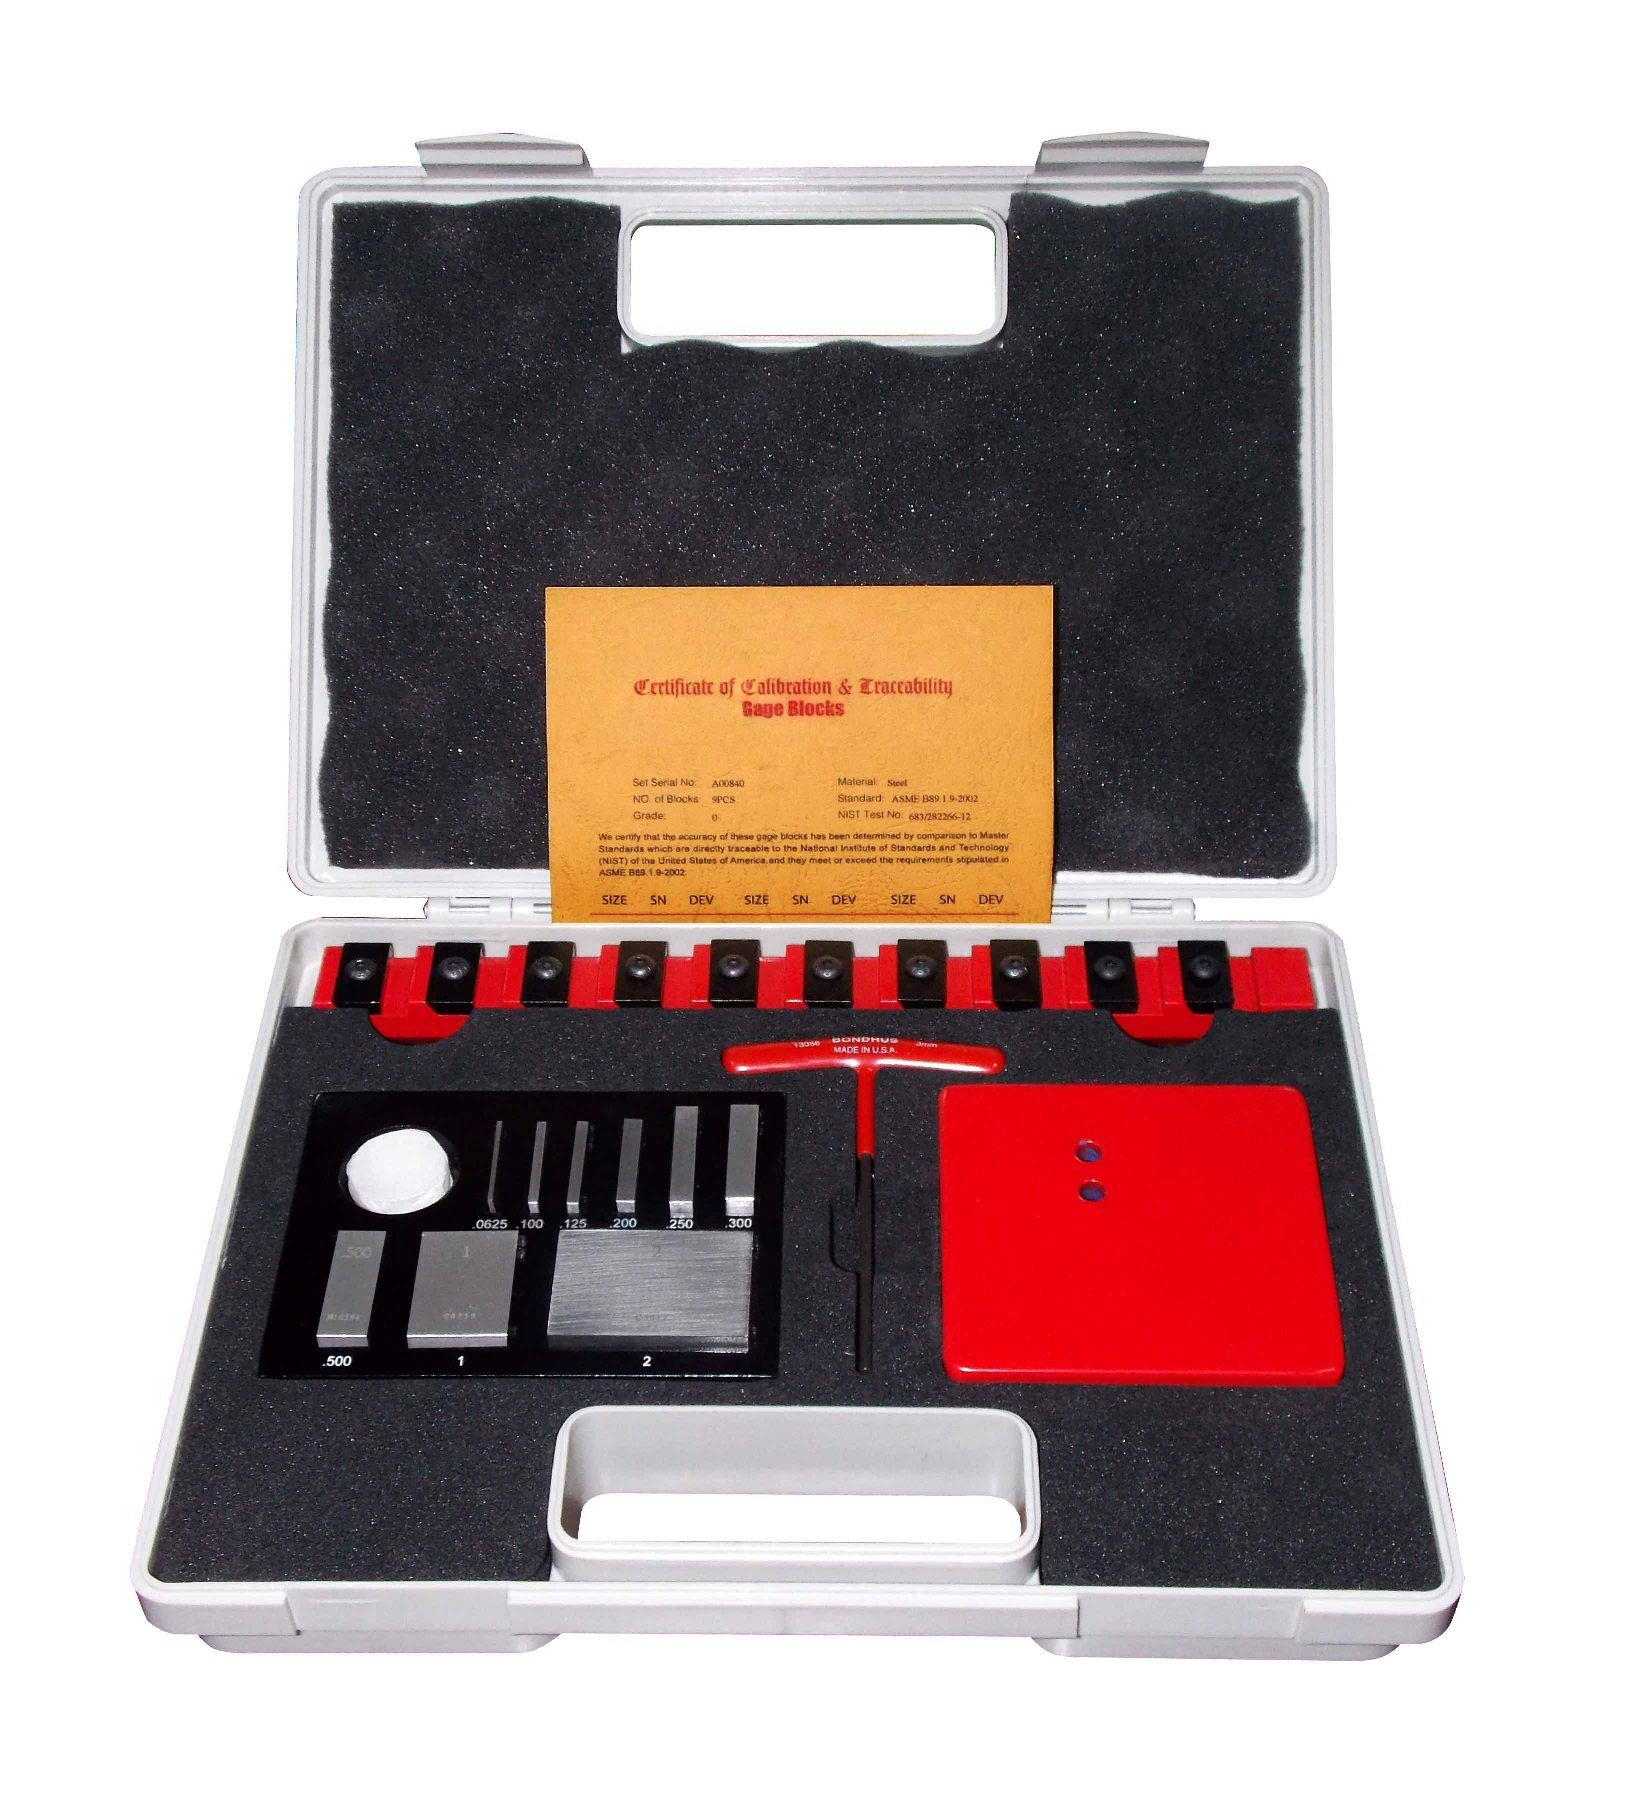 10 PIECE SETTING MASTERS MEASURING TOOLS (4101-0036)